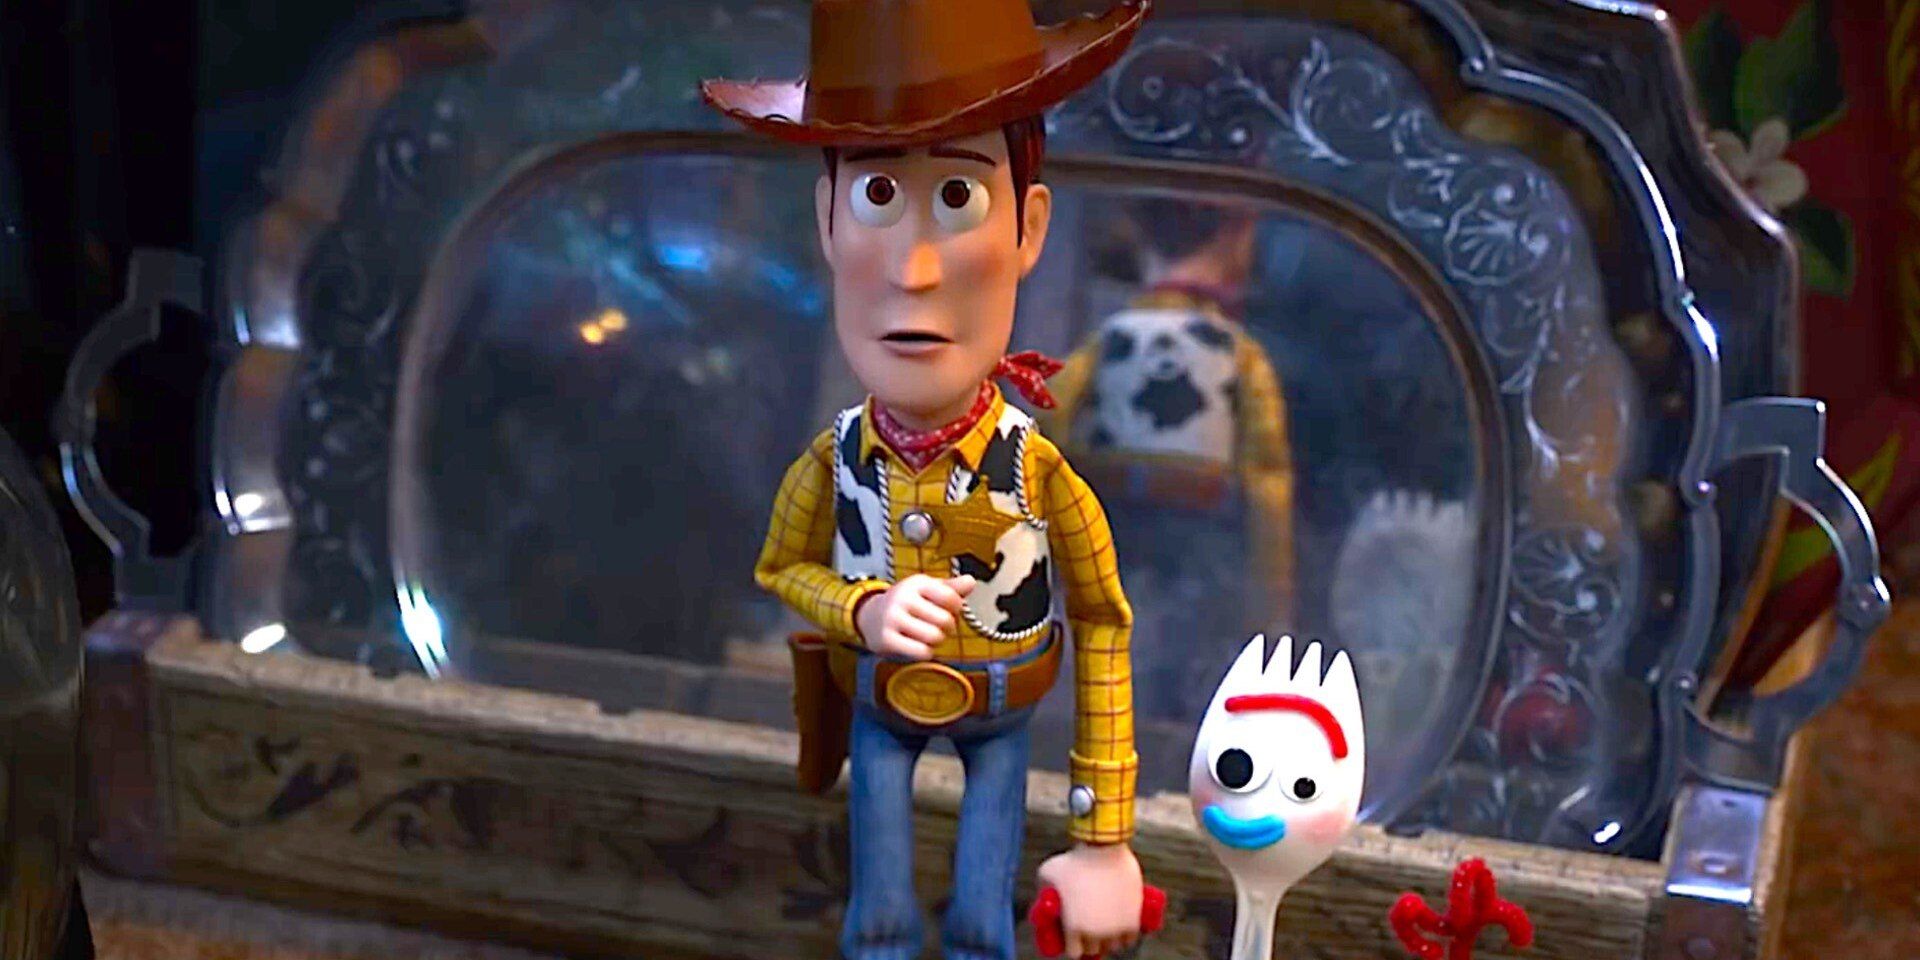 Woody and Forky holding hands in Toy Story 4